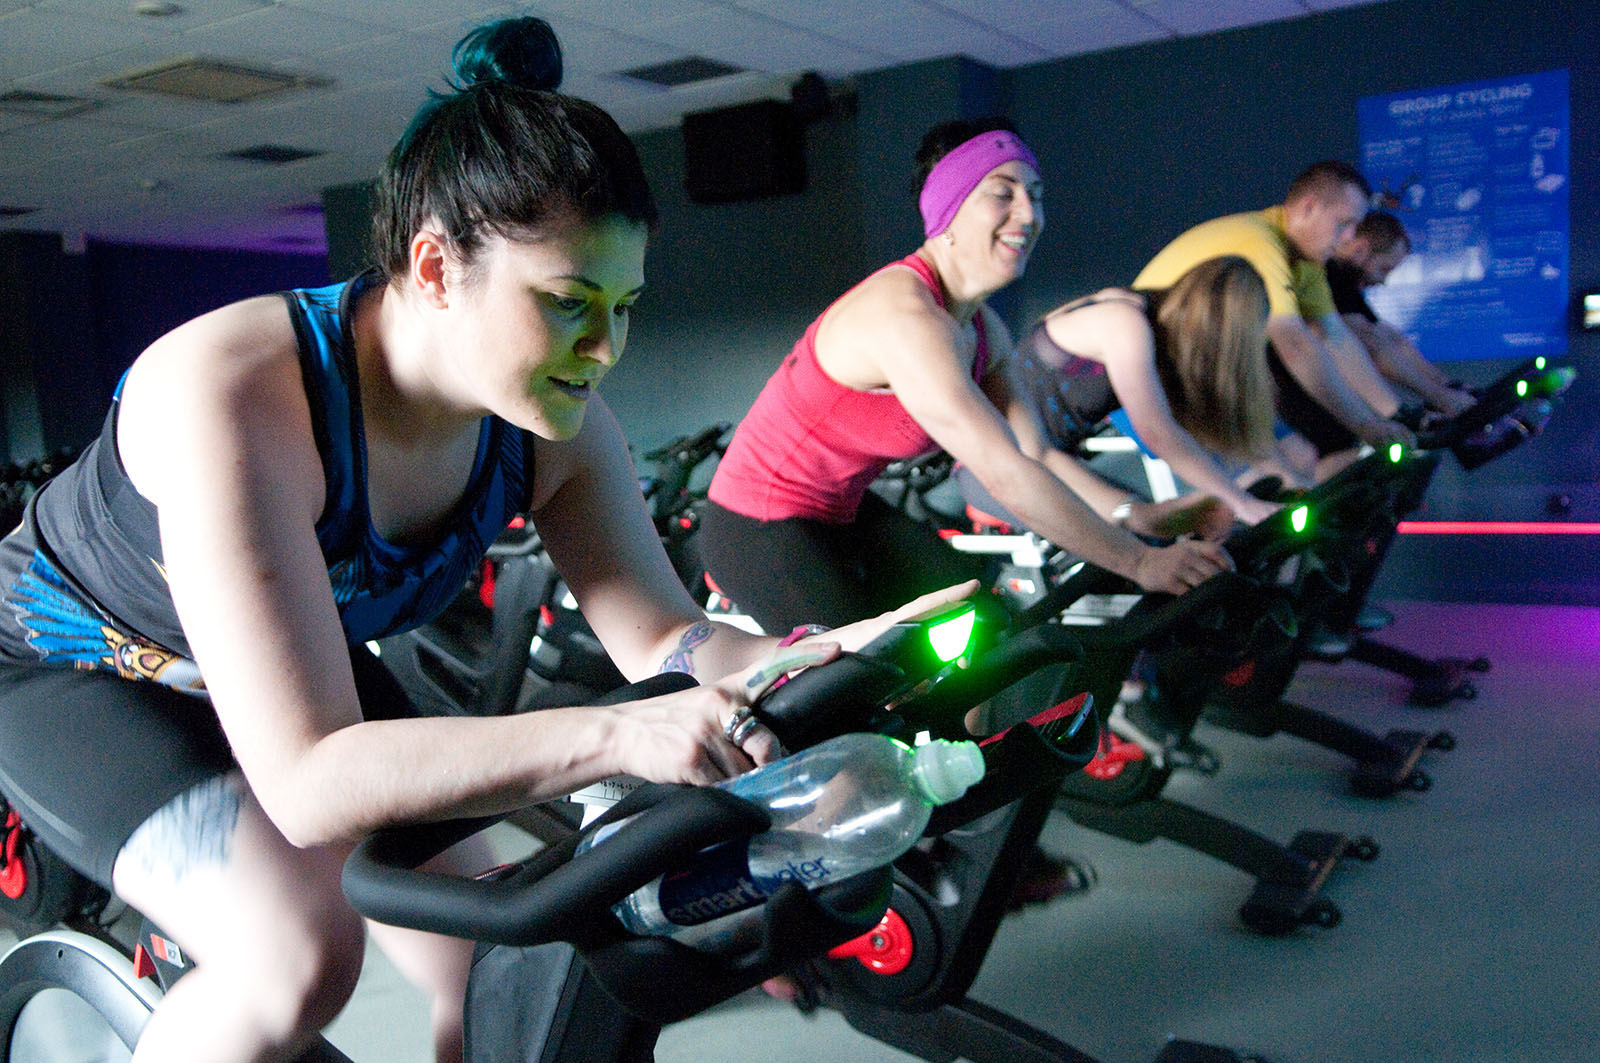 group of women riding on indoor cycling equipment